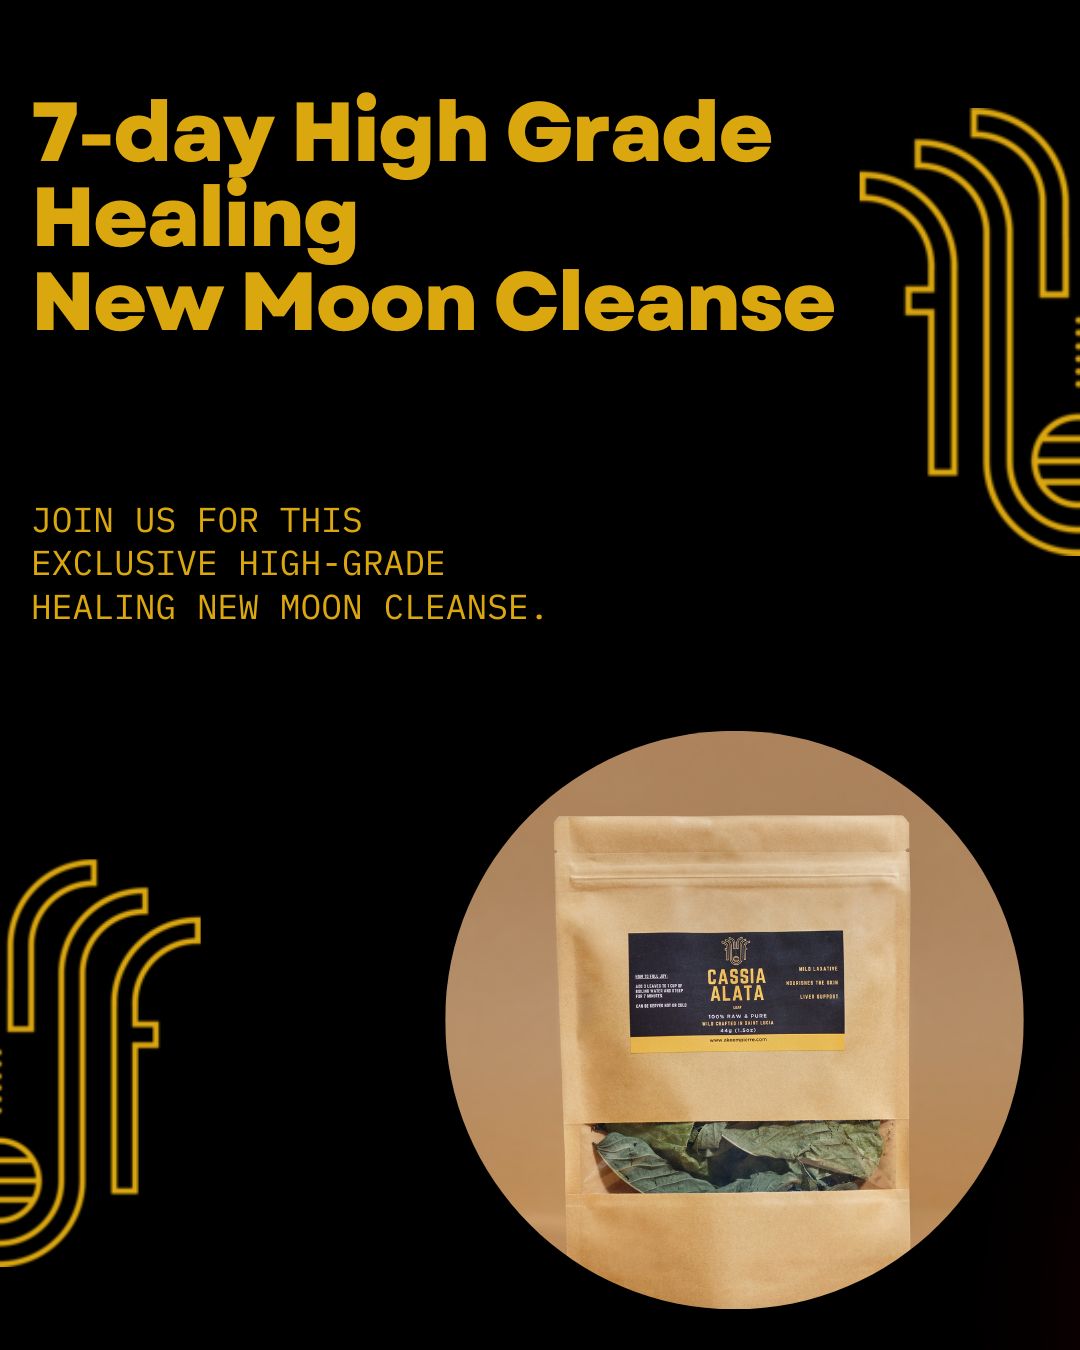 7-day High Grade Healing New Moon Cleanse (Jan 14th - 21st)